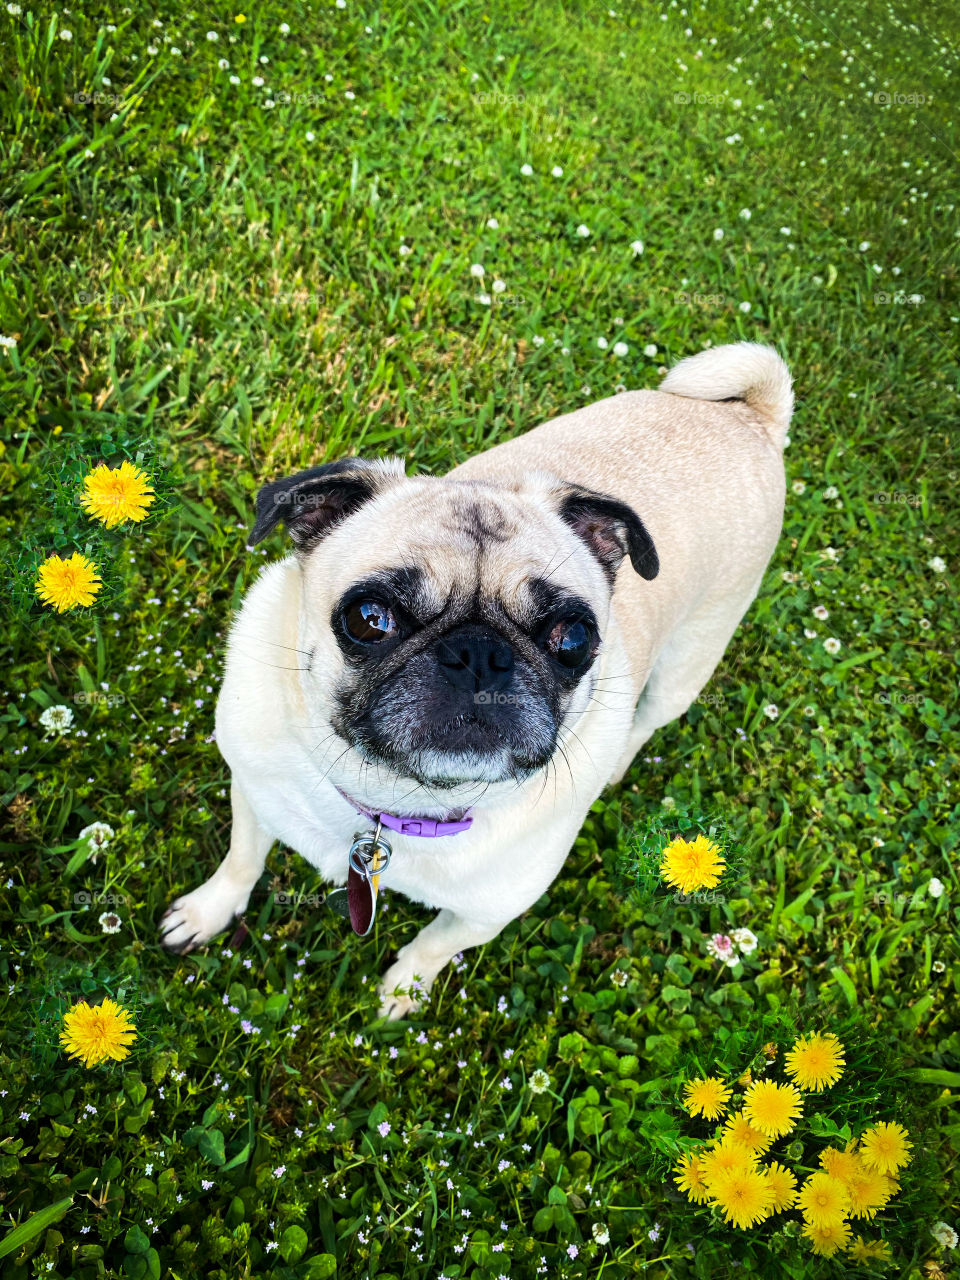 Izzy the Pug enjoying her time outside today.